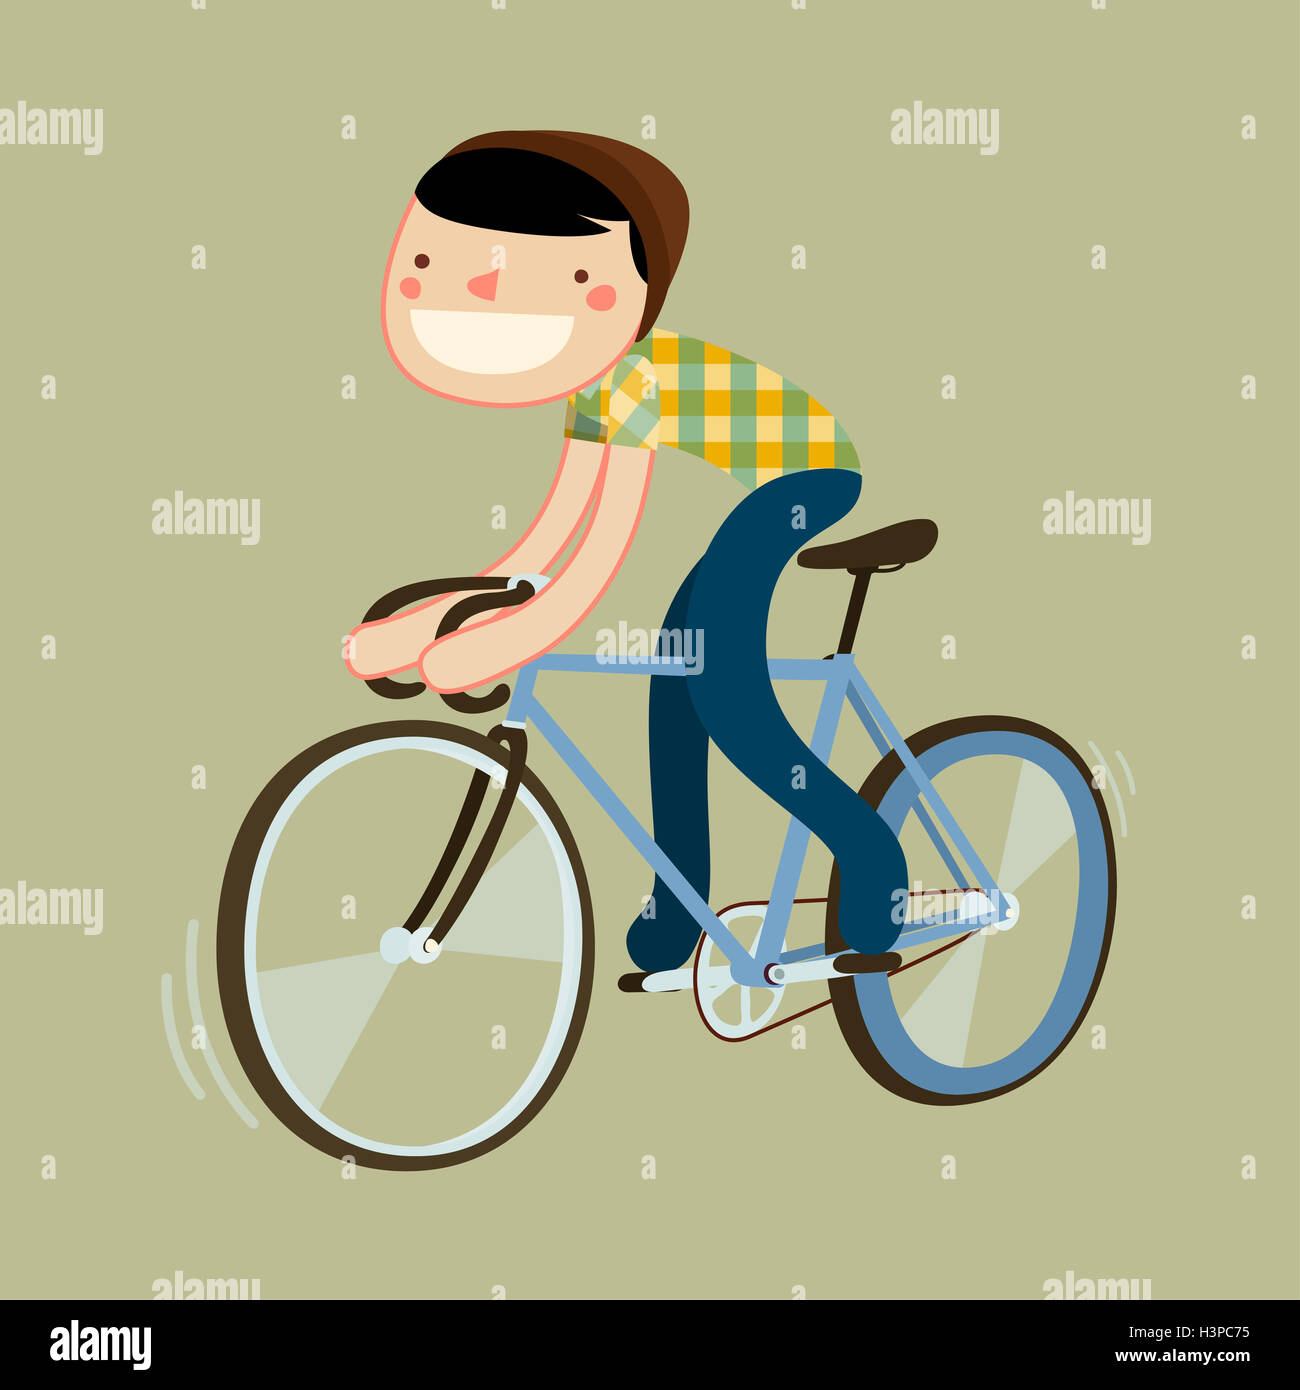 hipster riding fixie. boy riding road bike. character isolated. vector illustration Stock Photo